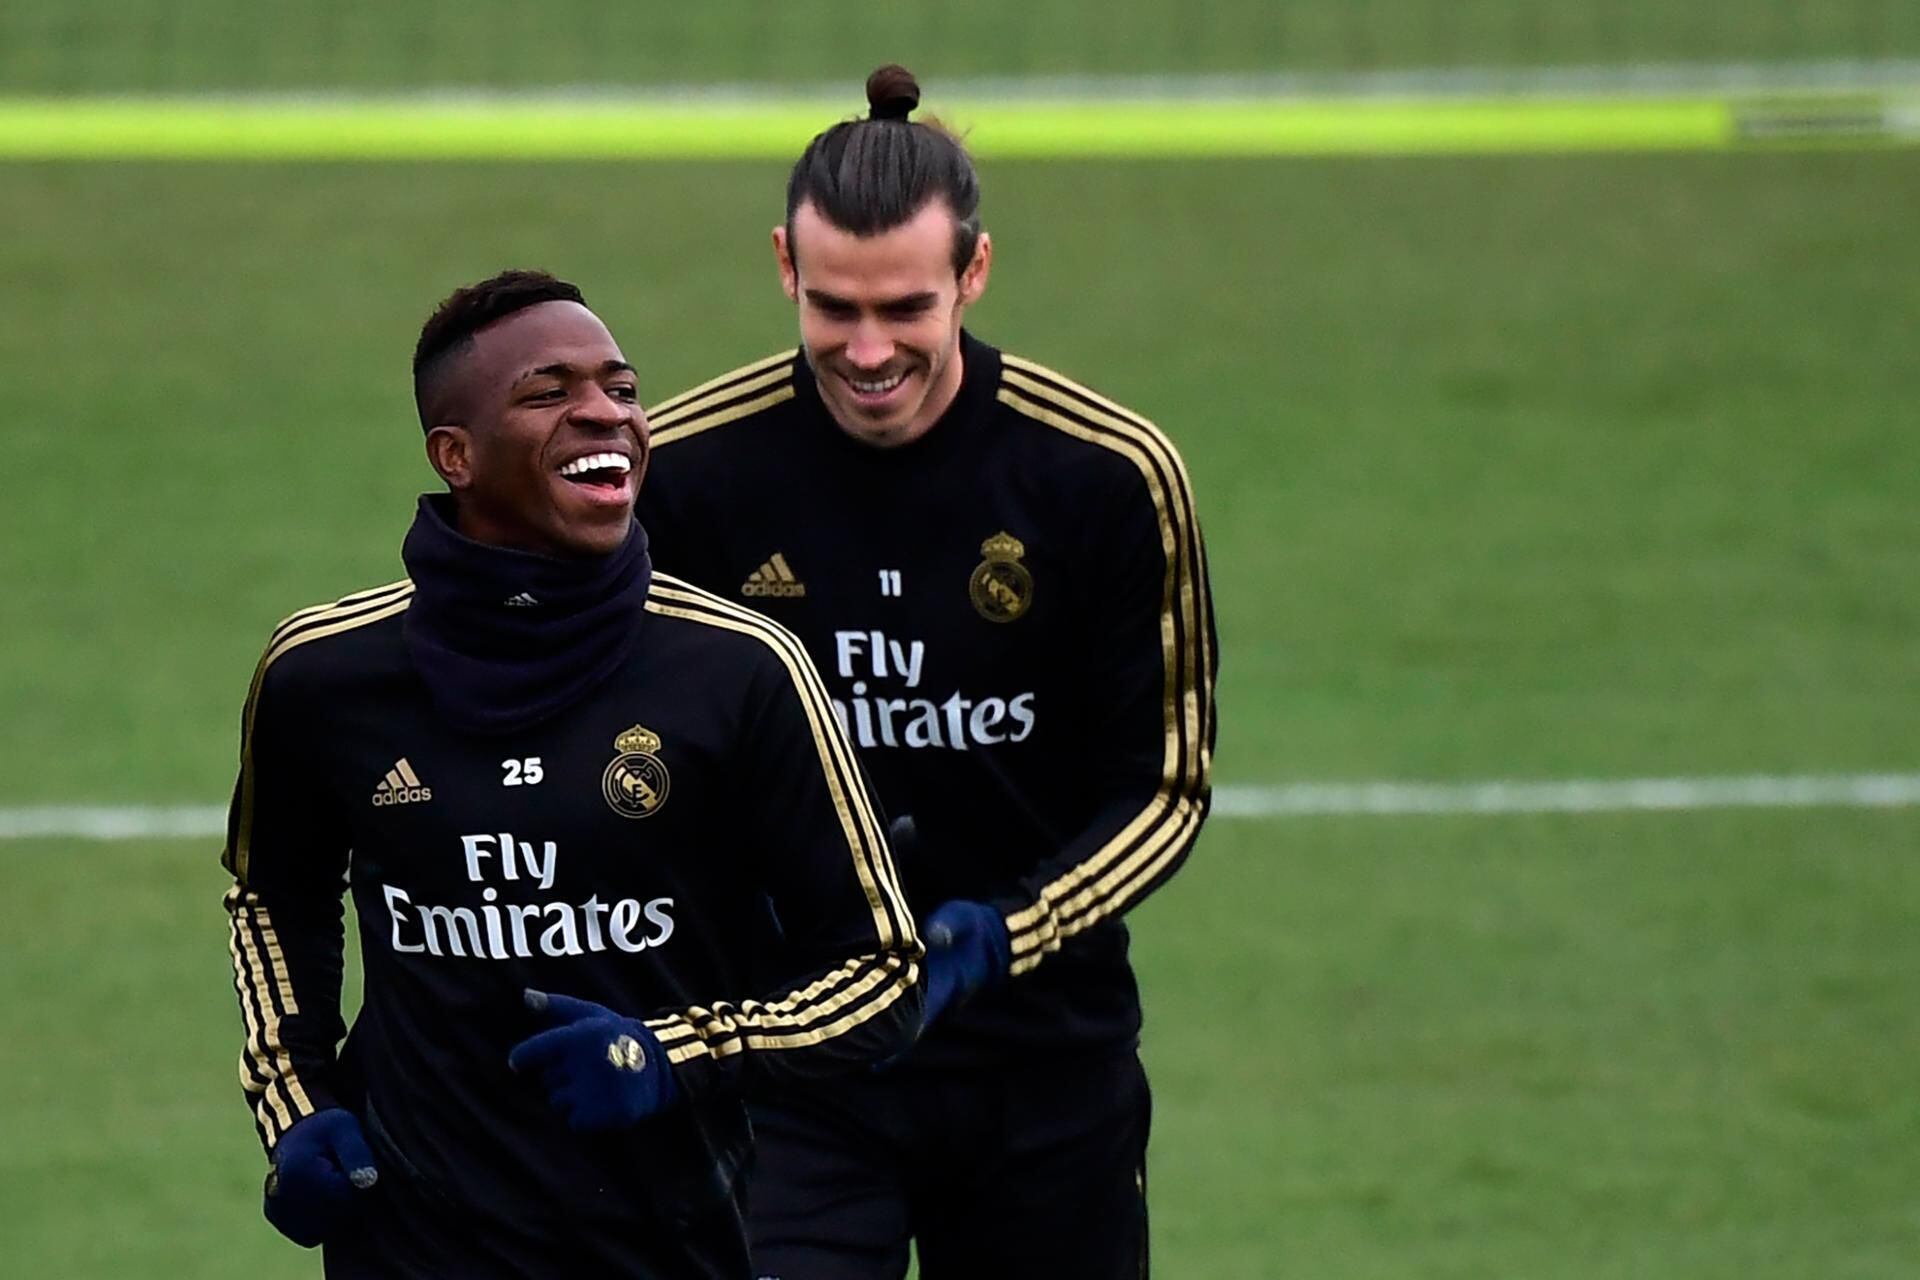 Vinicius Jr to replace Gareth Bale as Real Madrid's 'no.11'.